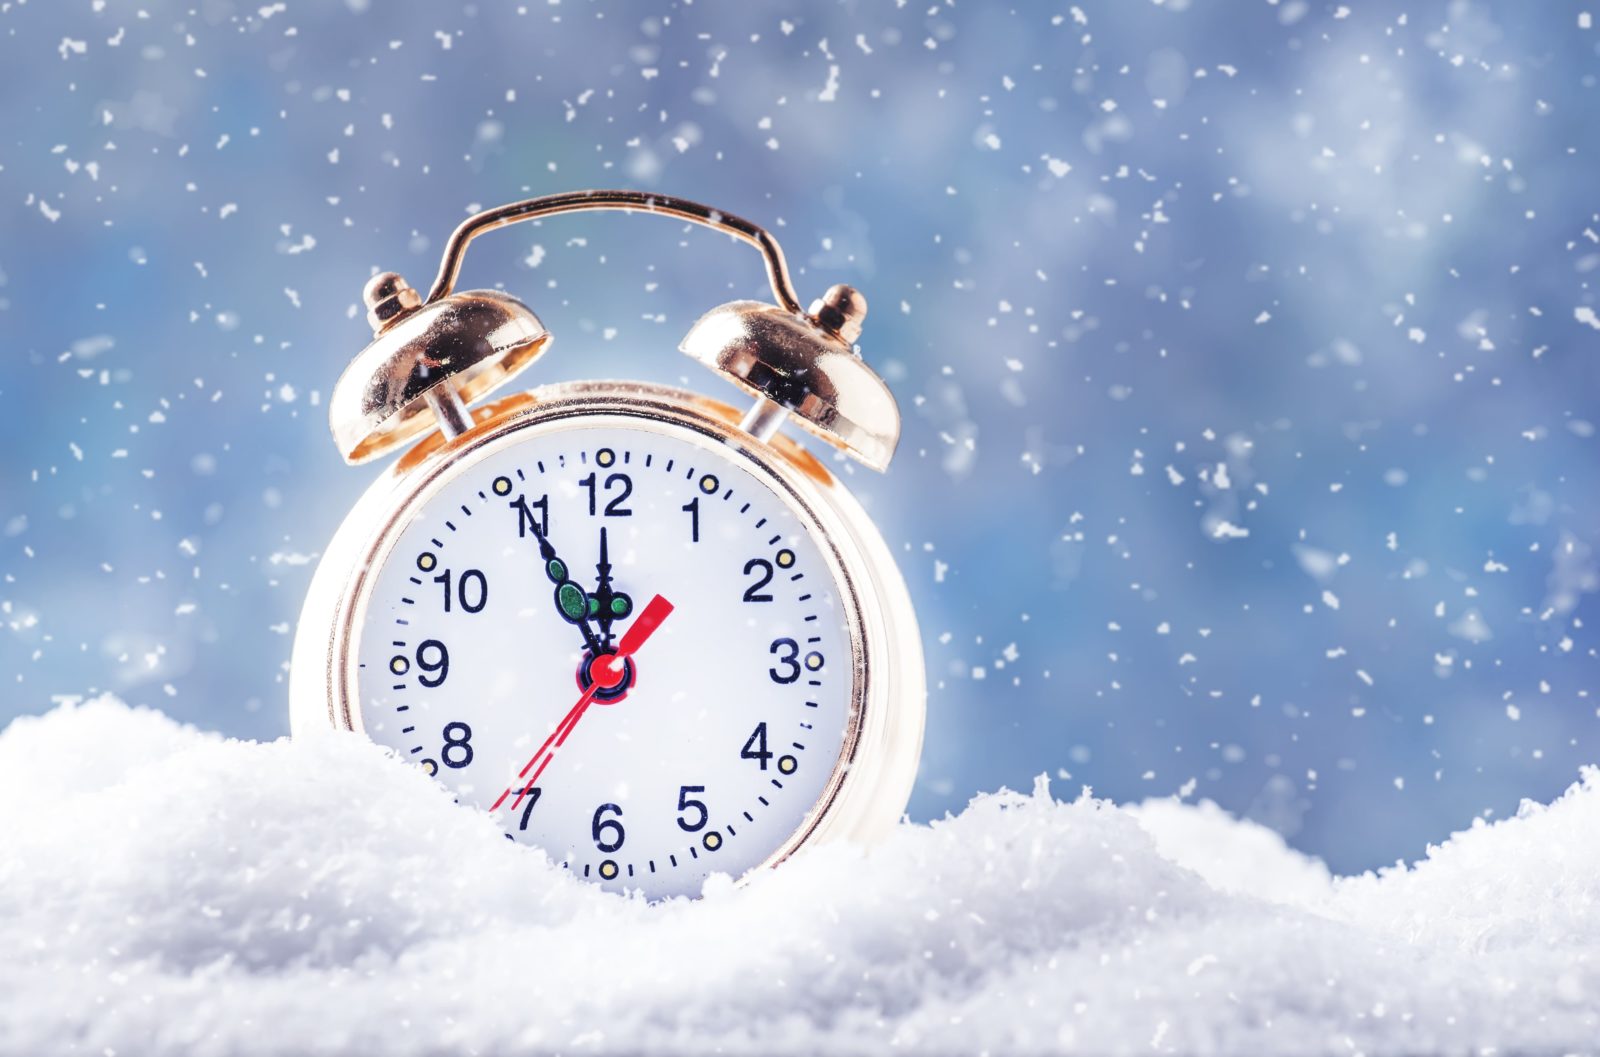 Corporate matching gift appeals are important year round, but especially in Q4. In this image, a gold metal alarm clock rests in a bank of snow against a blue snowy background.